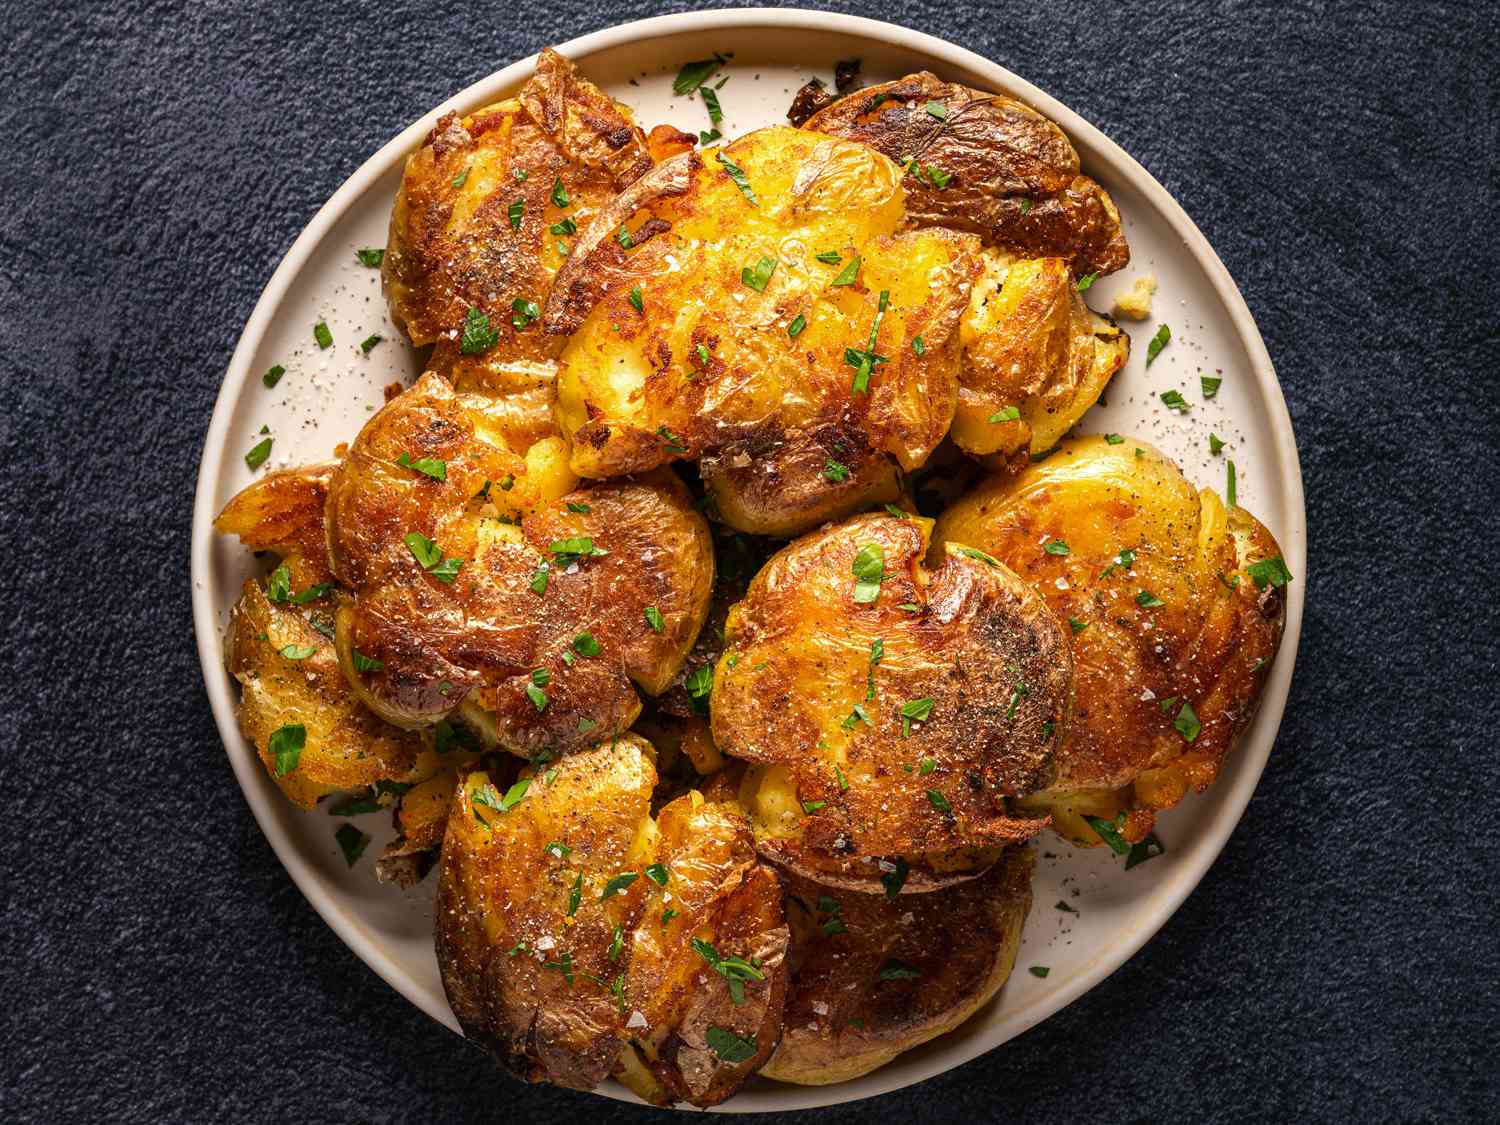 Golden brown crispy smashed potatoes on an oval white plate on a dark textured background.